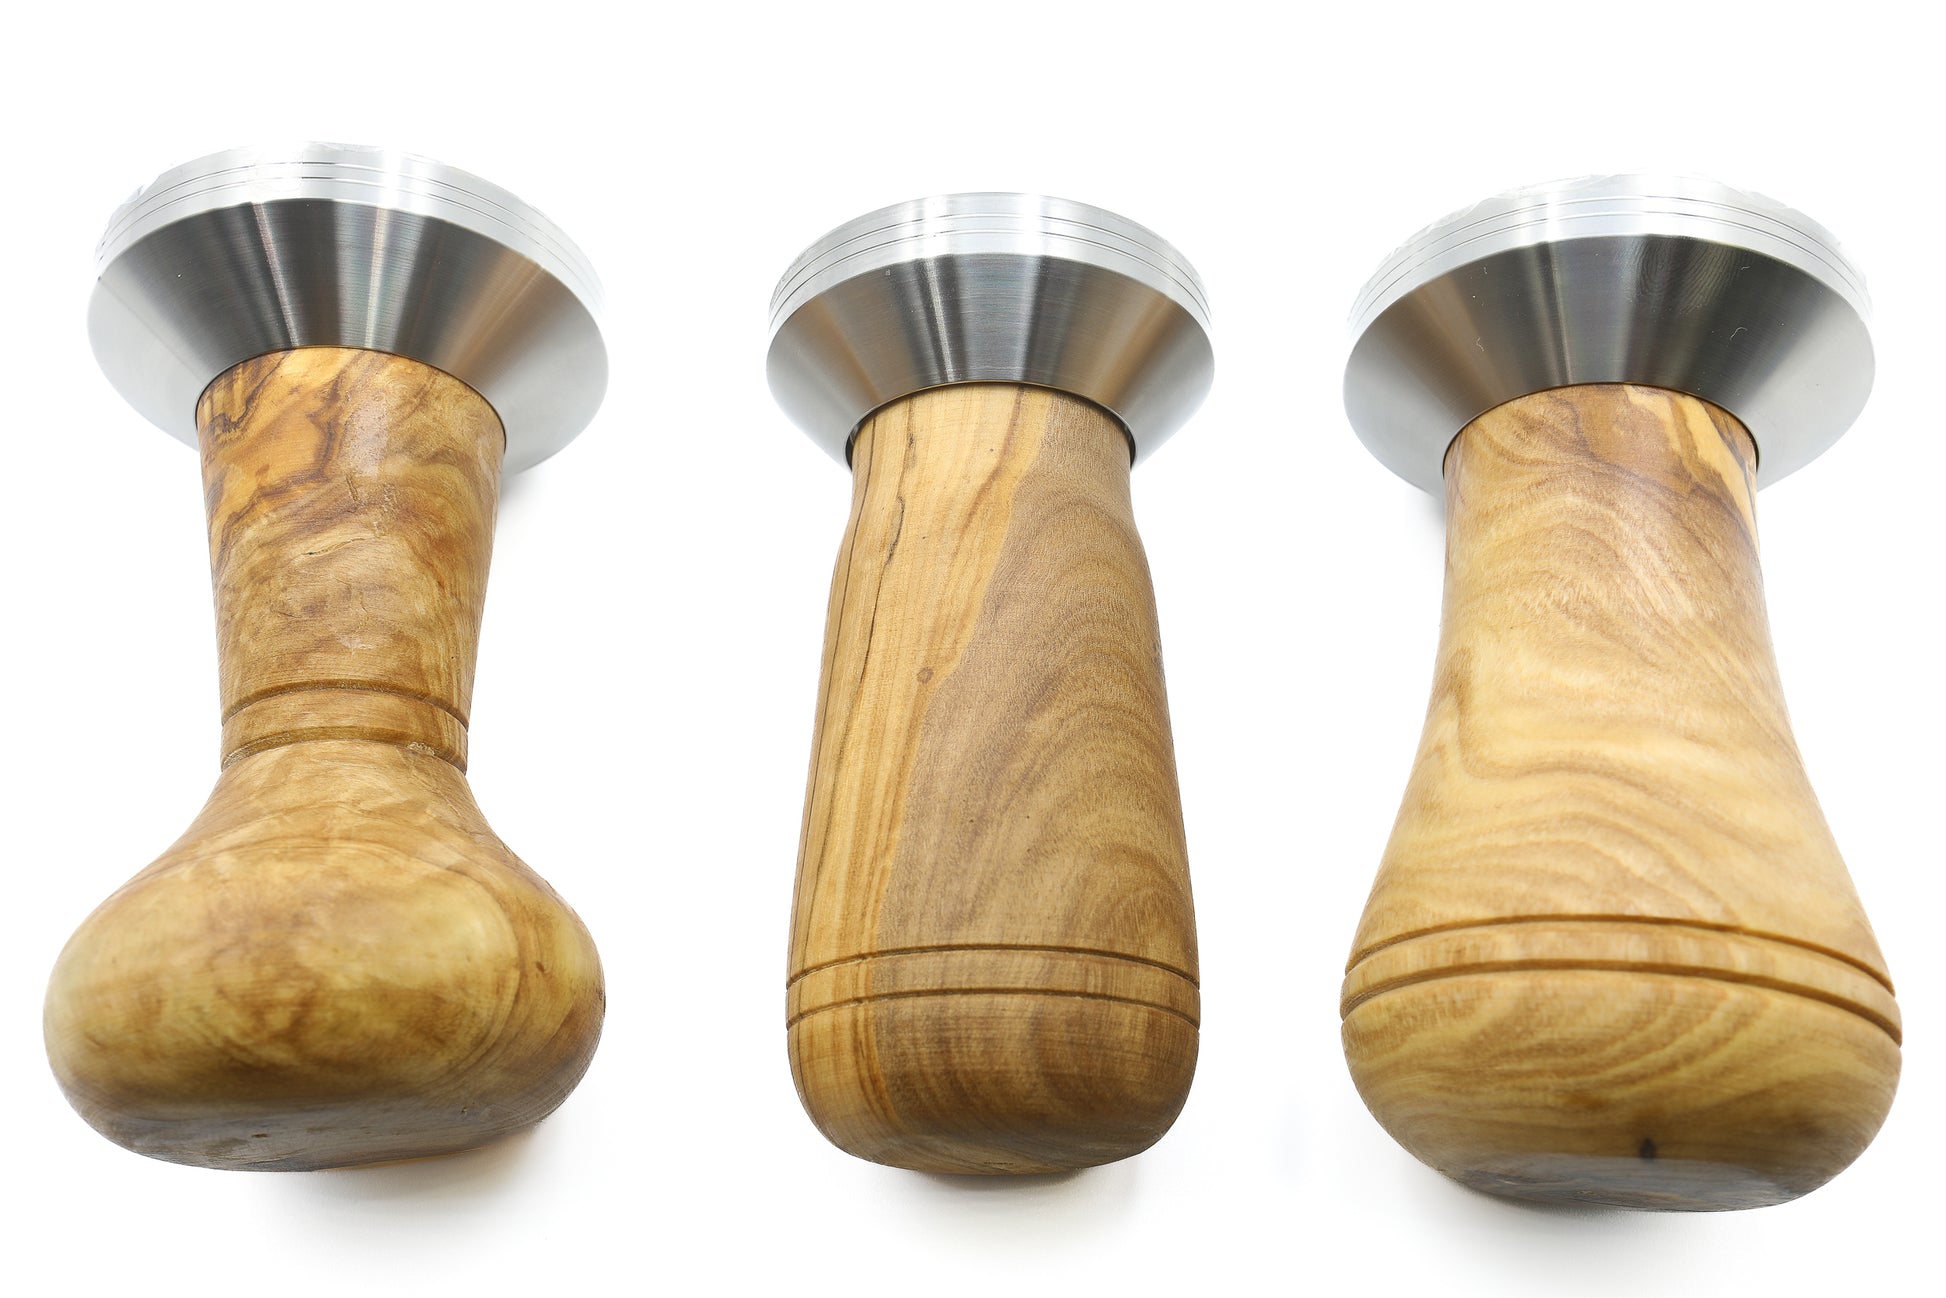 Durable and stylish olive wood and stainless steel coffee tamper with a holder